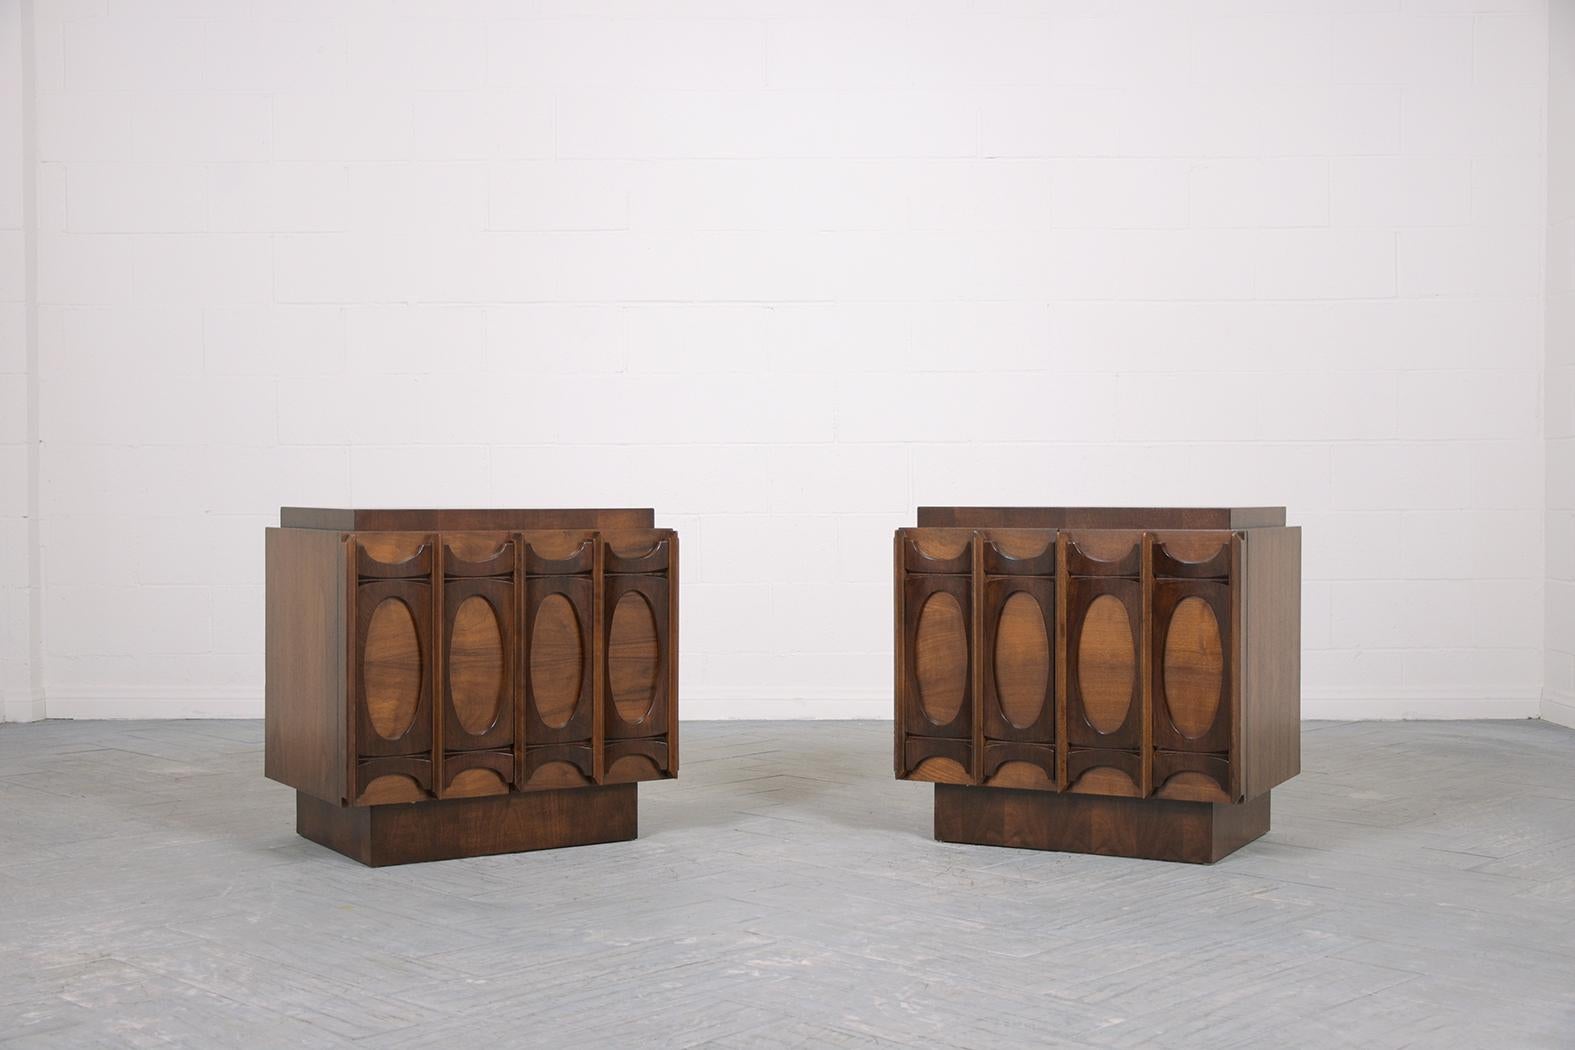 An extraordinary pair of vintage mid-century nightstands are in great condition, crafted out of walnut wood, and are newly restored by our professional craftsmen team. This set features an eye-catching two tones walnut color with lacquered finish,